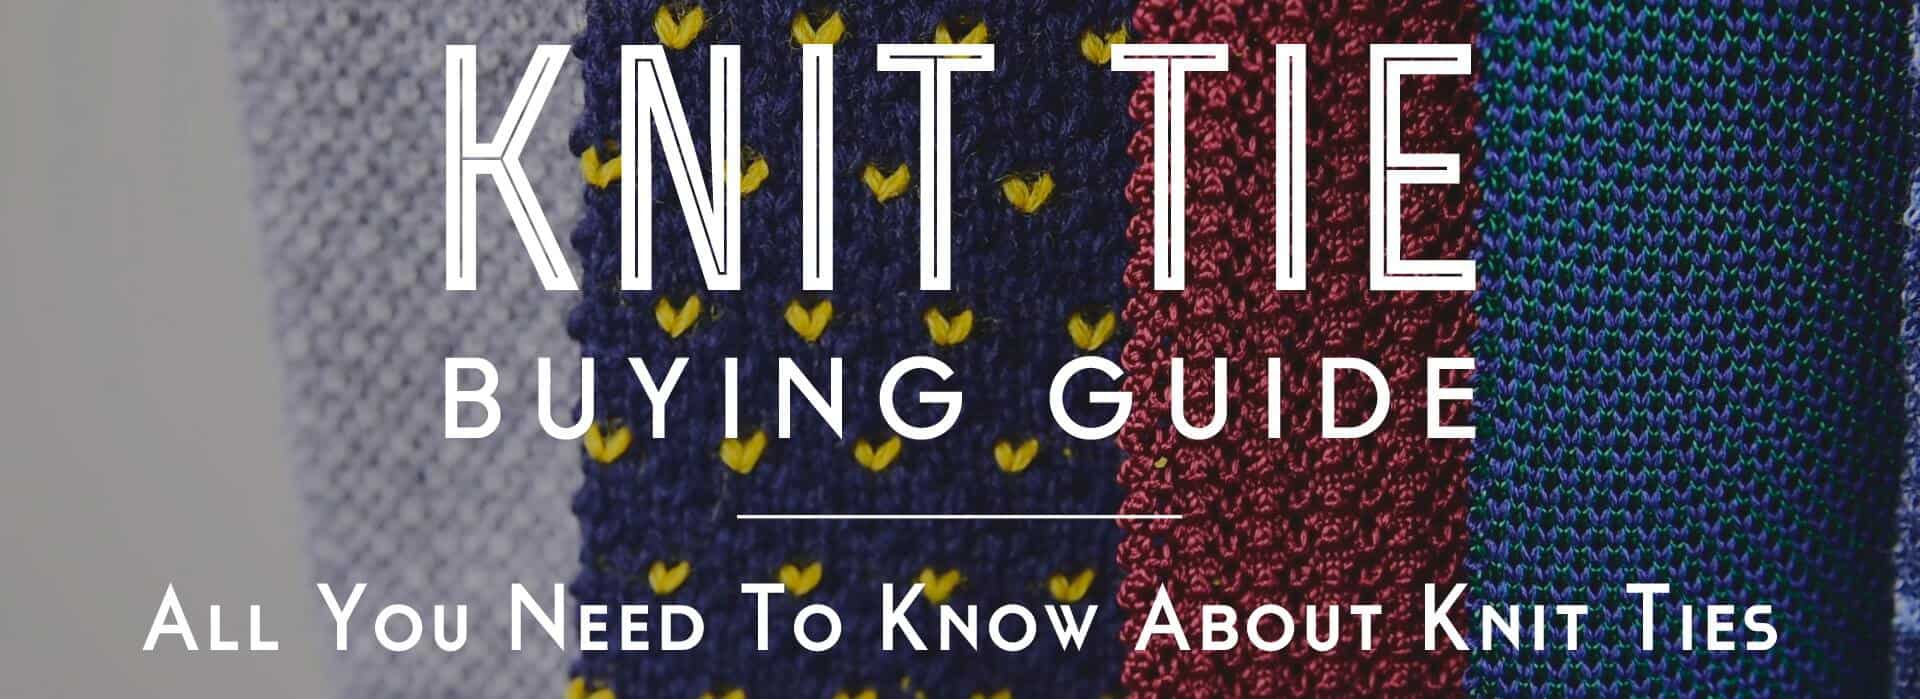 Knit Tie Buying Guide - All You Need to Know About Knit Ties